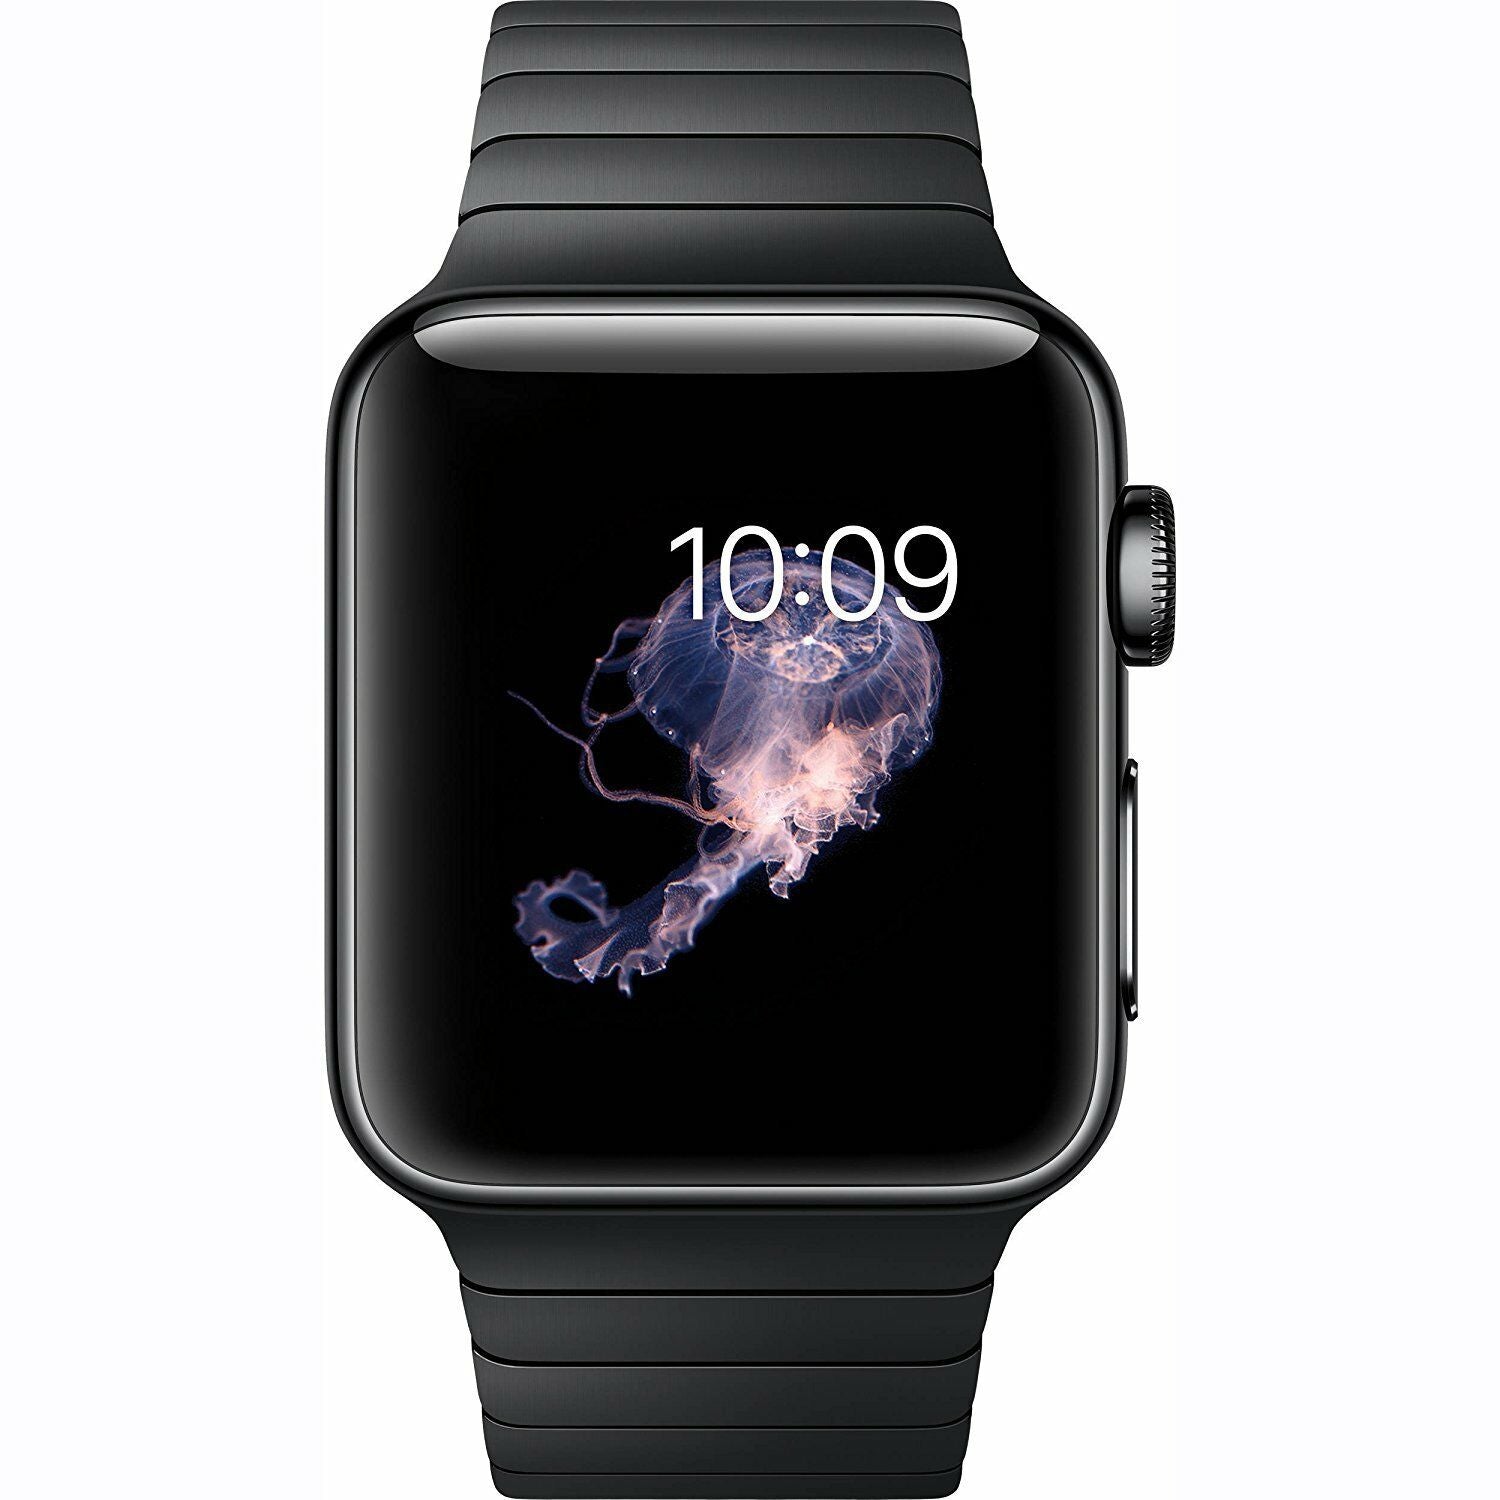 Apple Watch Series 2 38mm Smartwatch (Space Black Stainless Steel Case, Space Black Link Band) with 2 Year Extended Warranty